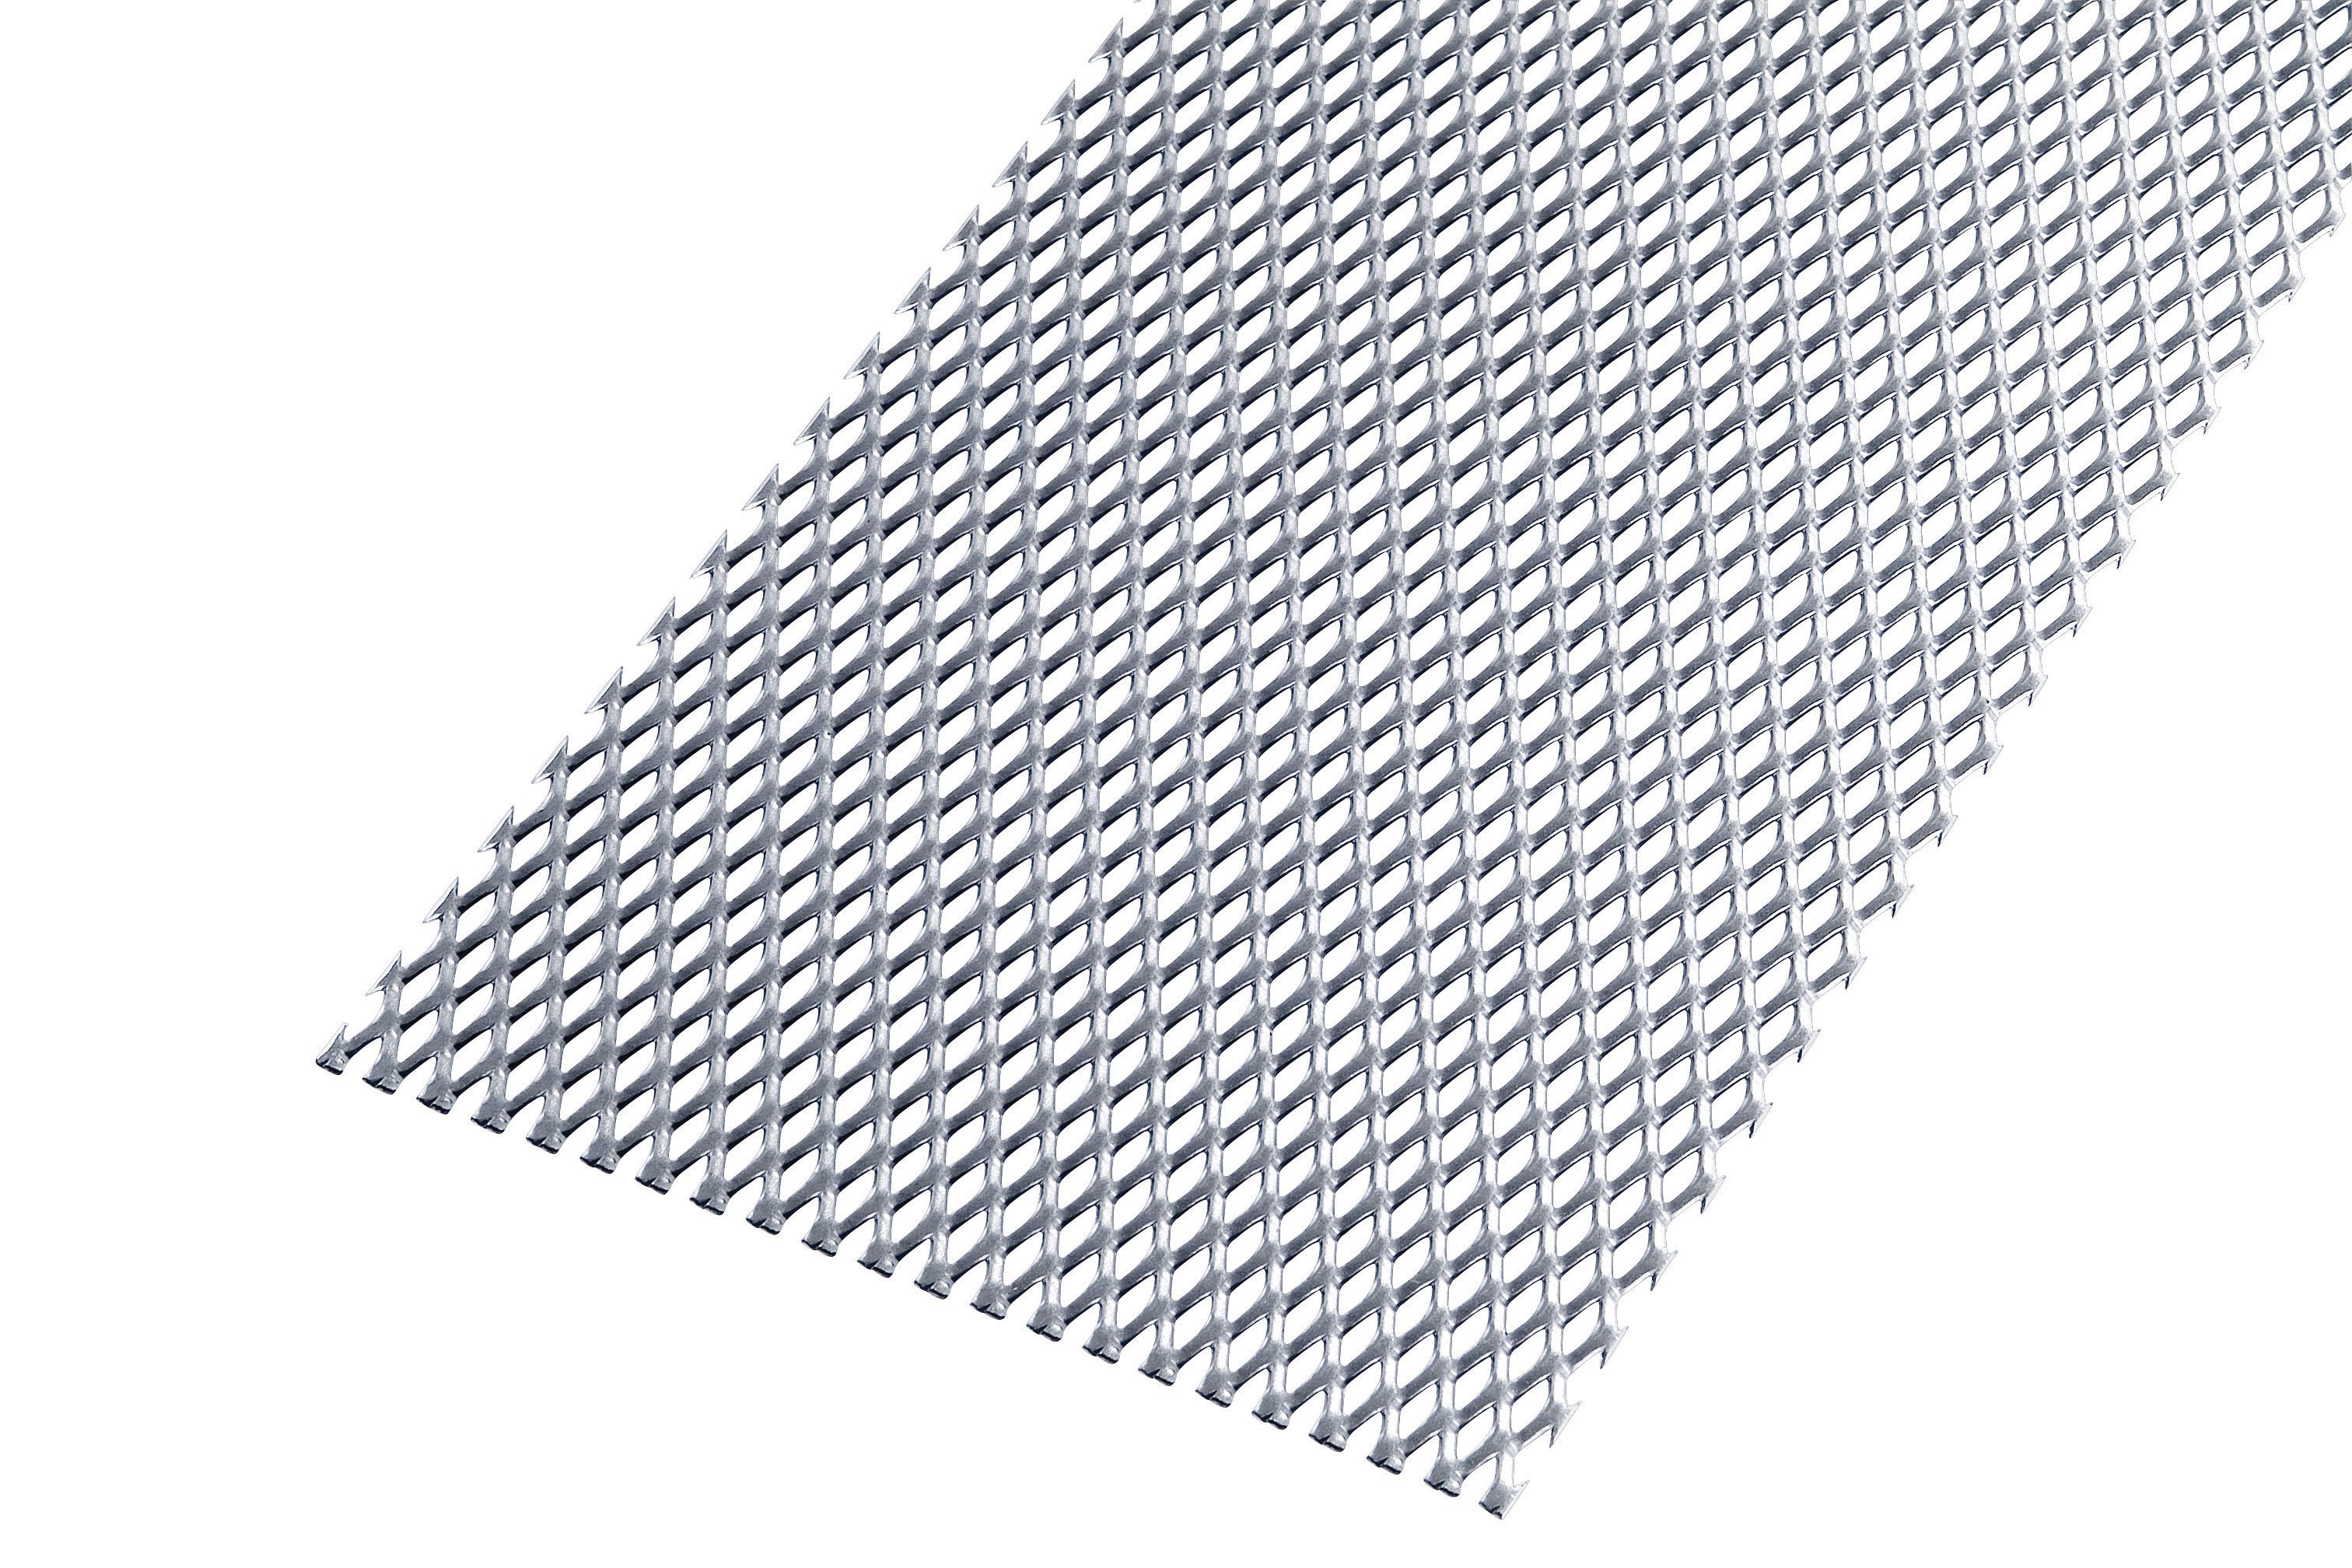 Rothley Perforated Stretched Metal Aluminium Sheet - 250 x 500mm